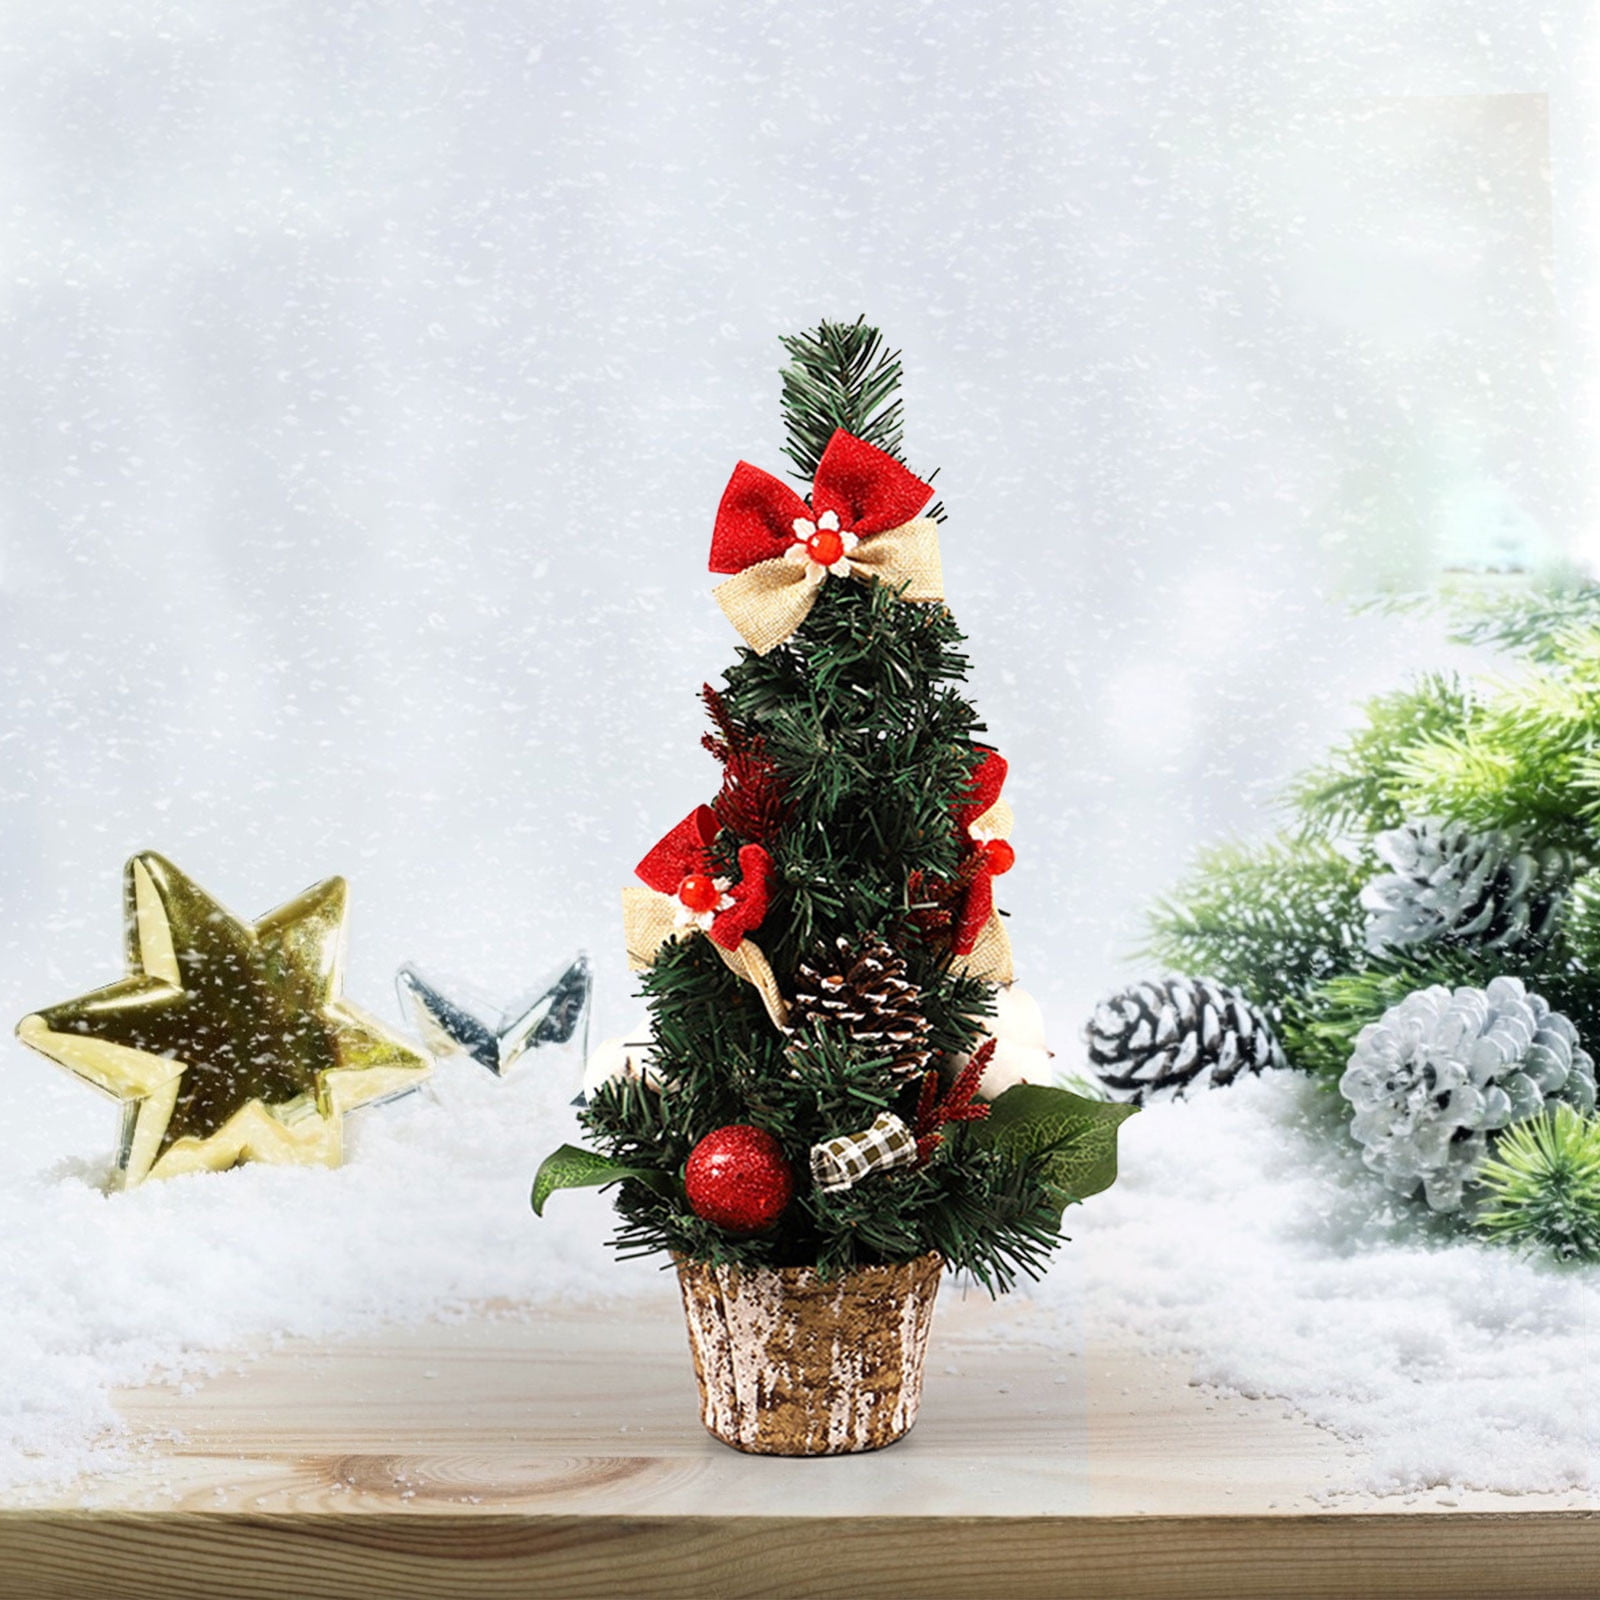 Artificial Mini Christmas Trees, 43pcs Mini Pine Tree for Miniature Scenes Designing Christmas Table Top and Xmas Holiday Party Decor The Holiday Aisl